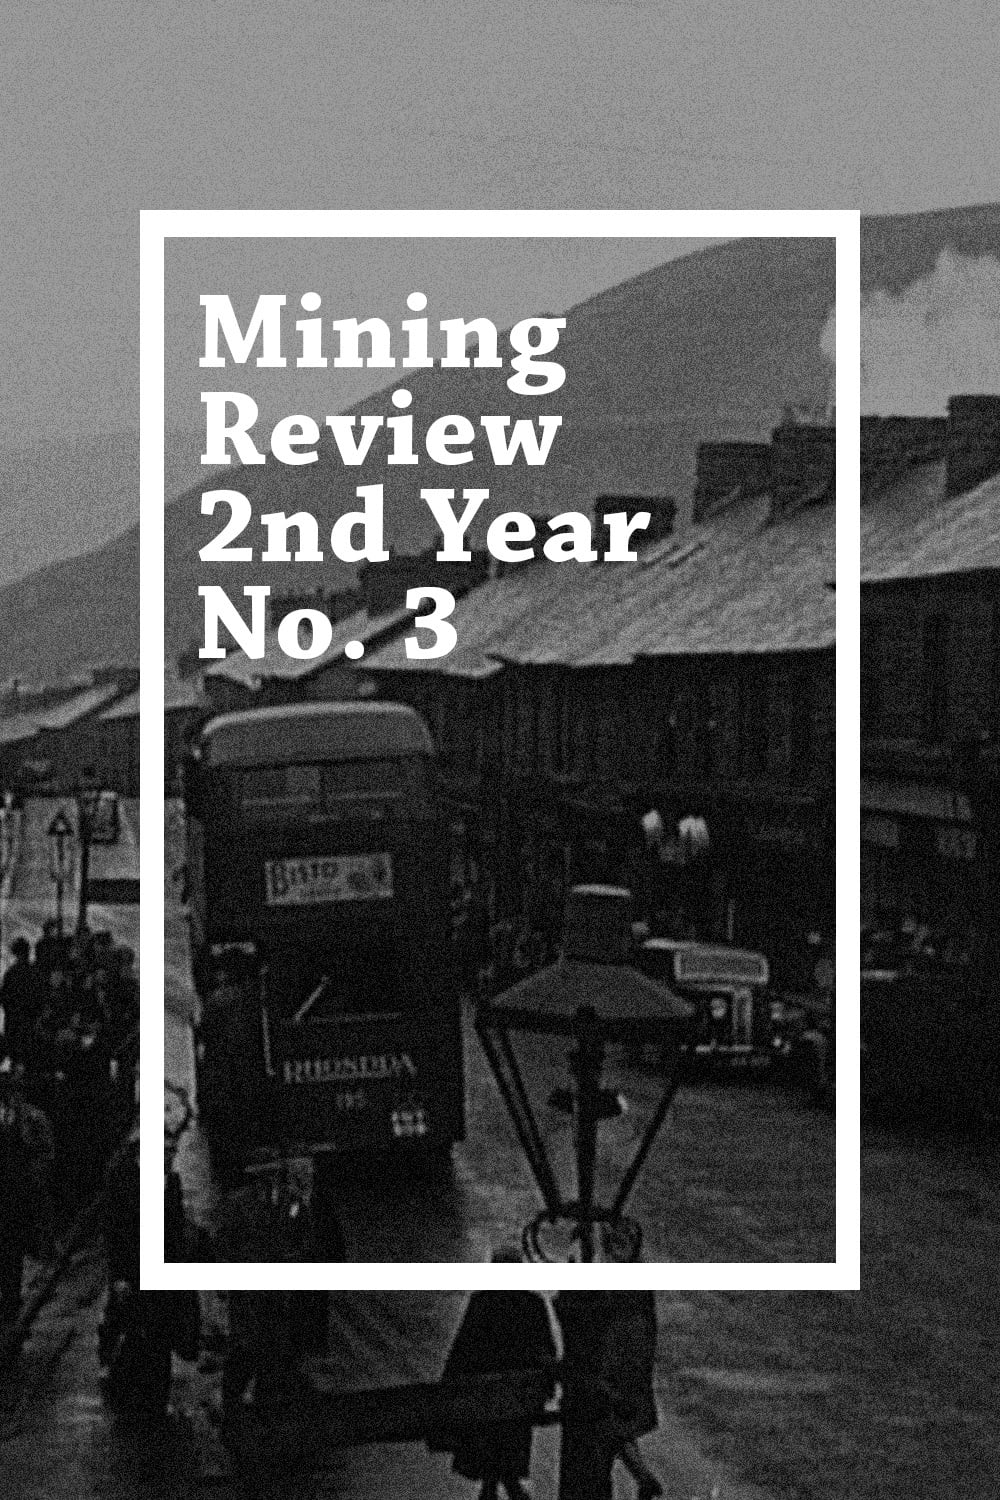 Mining Review 2nd Year No. 3